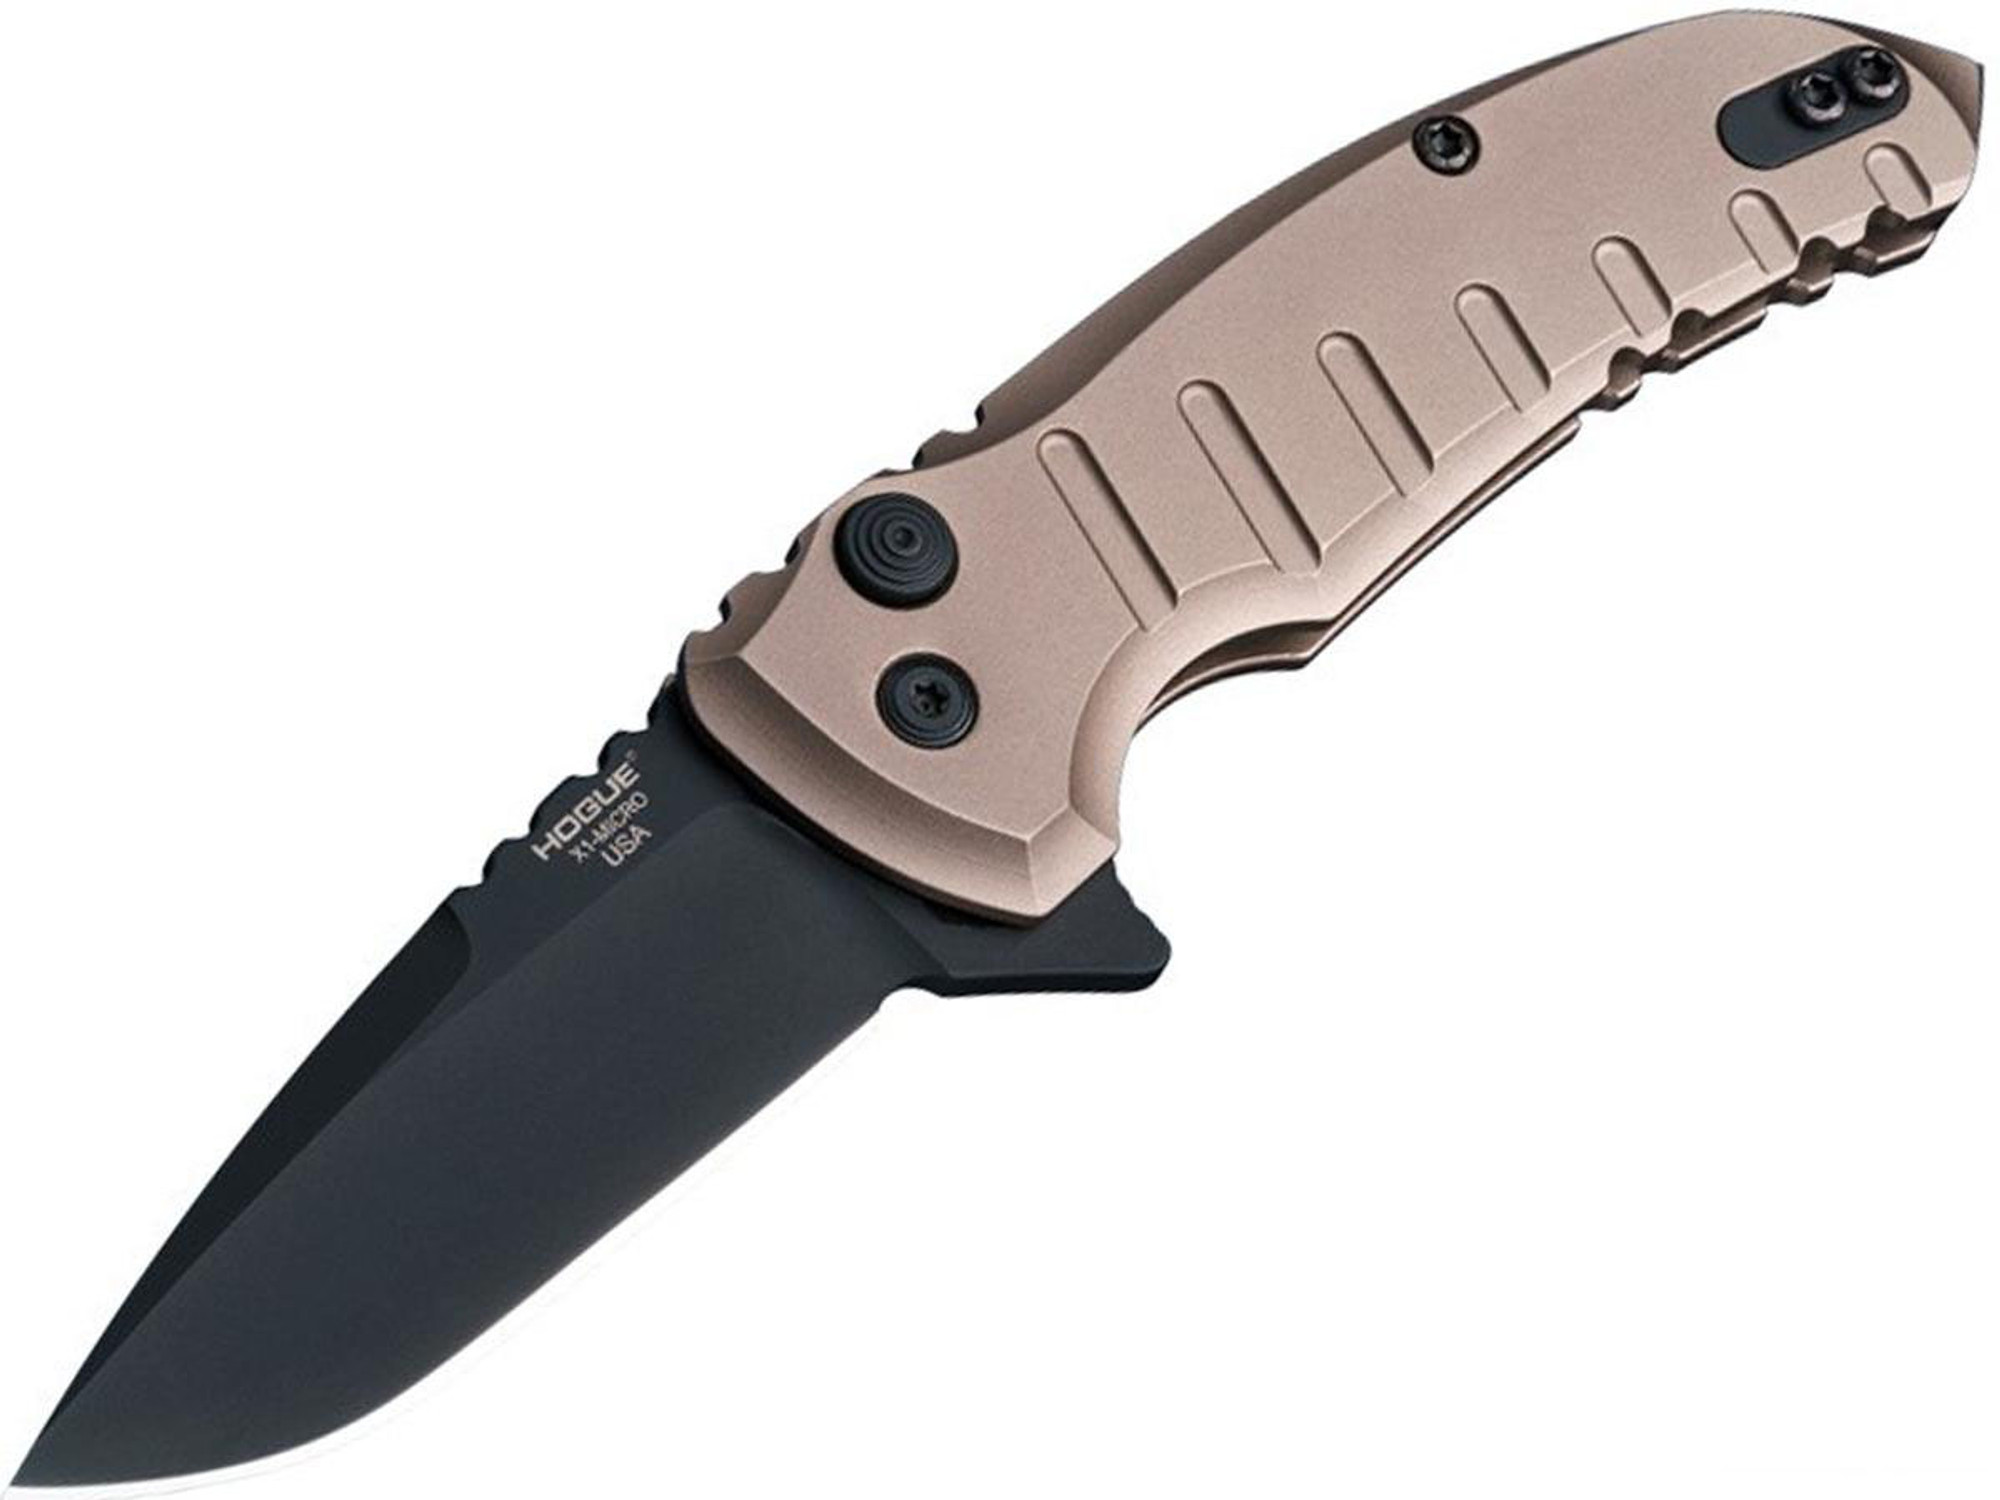 Houge X1-Microflip 2.75" Folder Drop Point Blade with Aluminum Frame (Color: Flat Dark Earth)